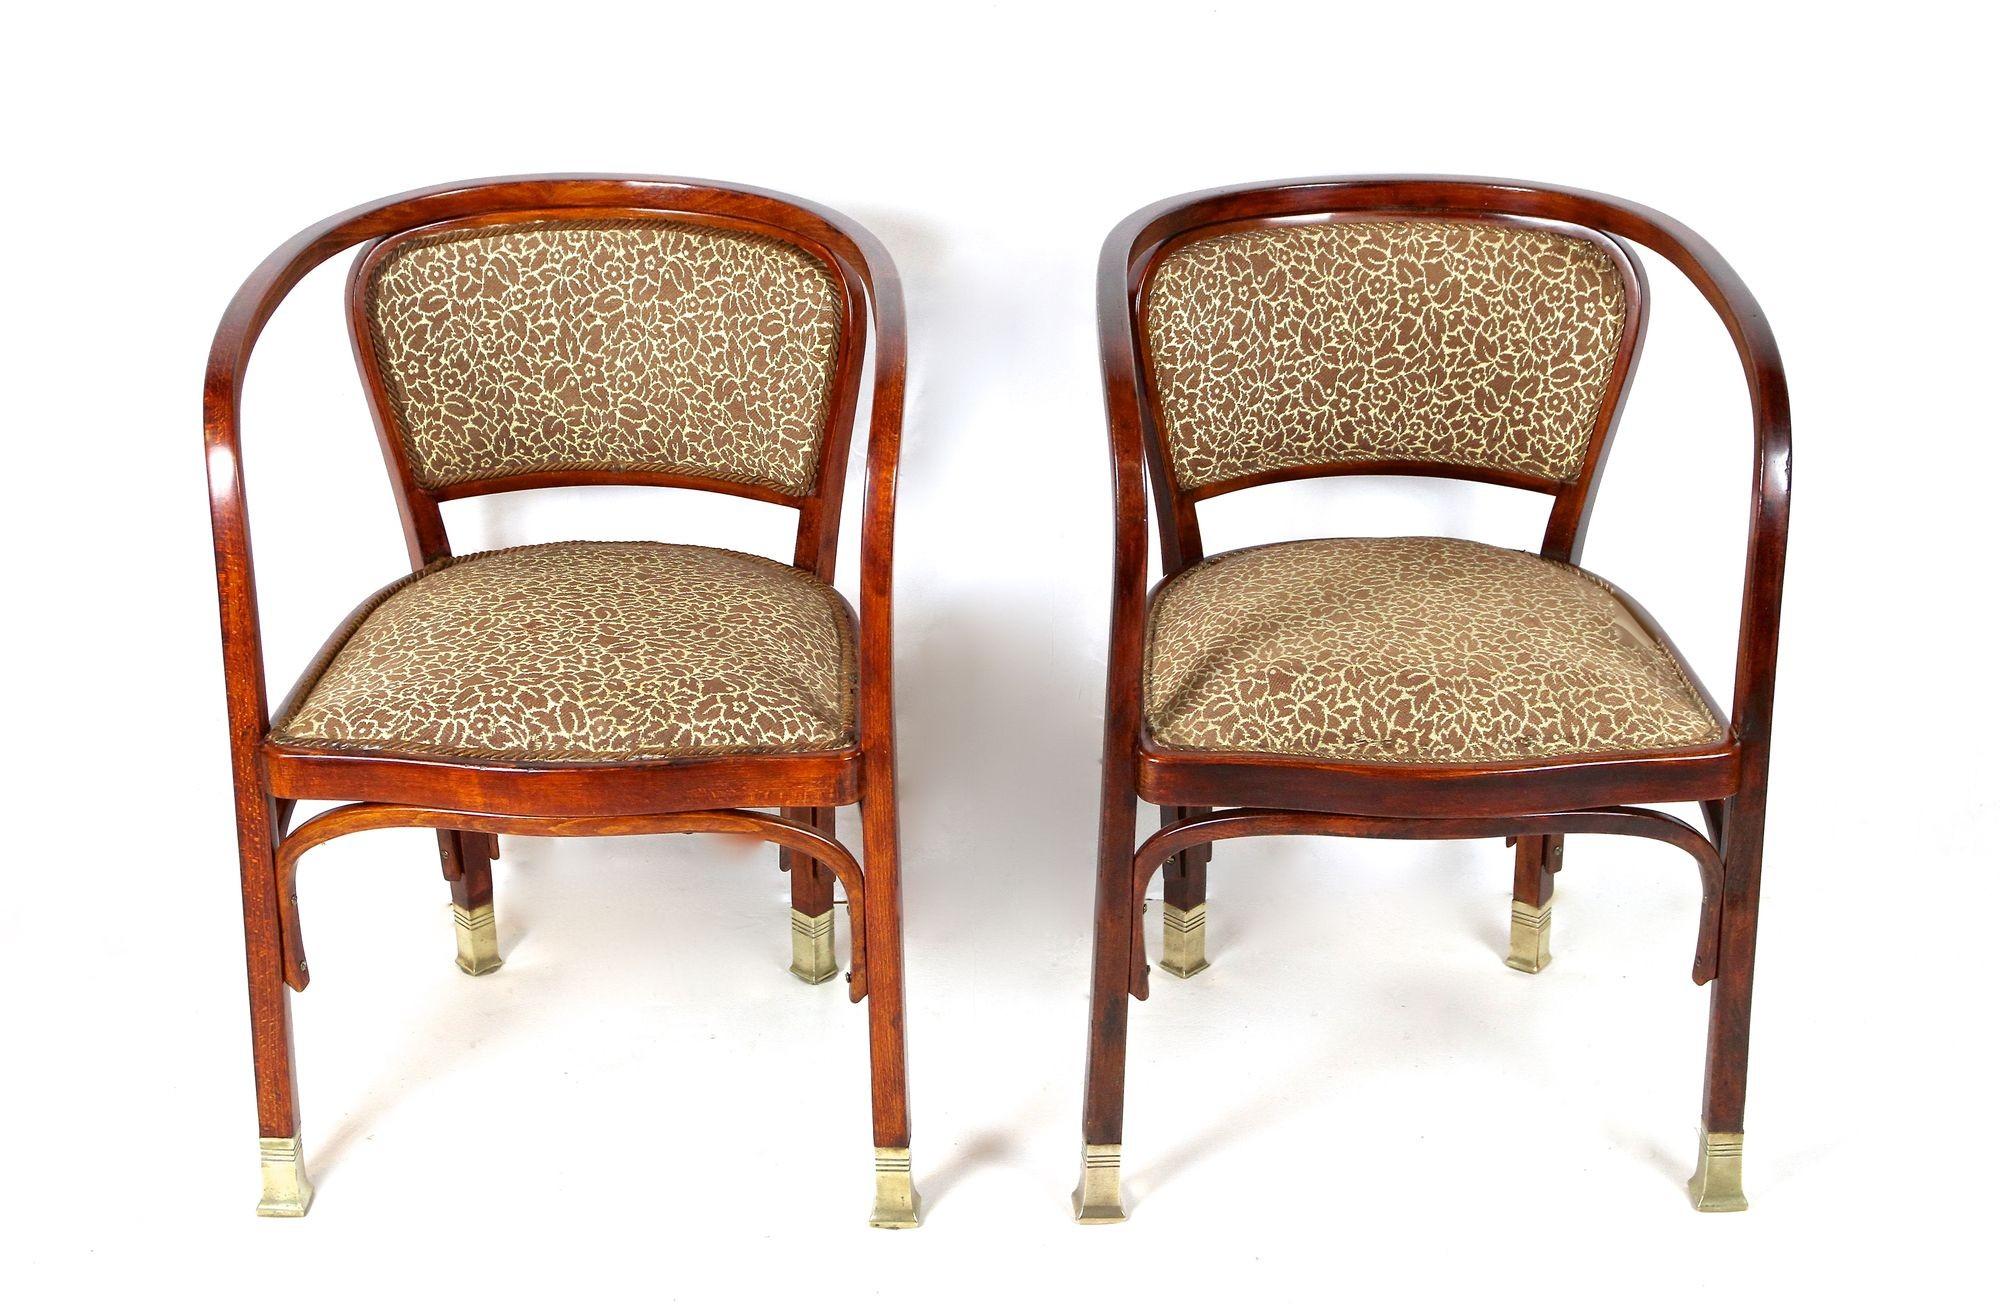 Pair Of Art Nouveau Armchairs by Gustav Siegel For J&J Kohn, Austria ca. 1905 In Good Condition For Sale In Lichtenberg, AT